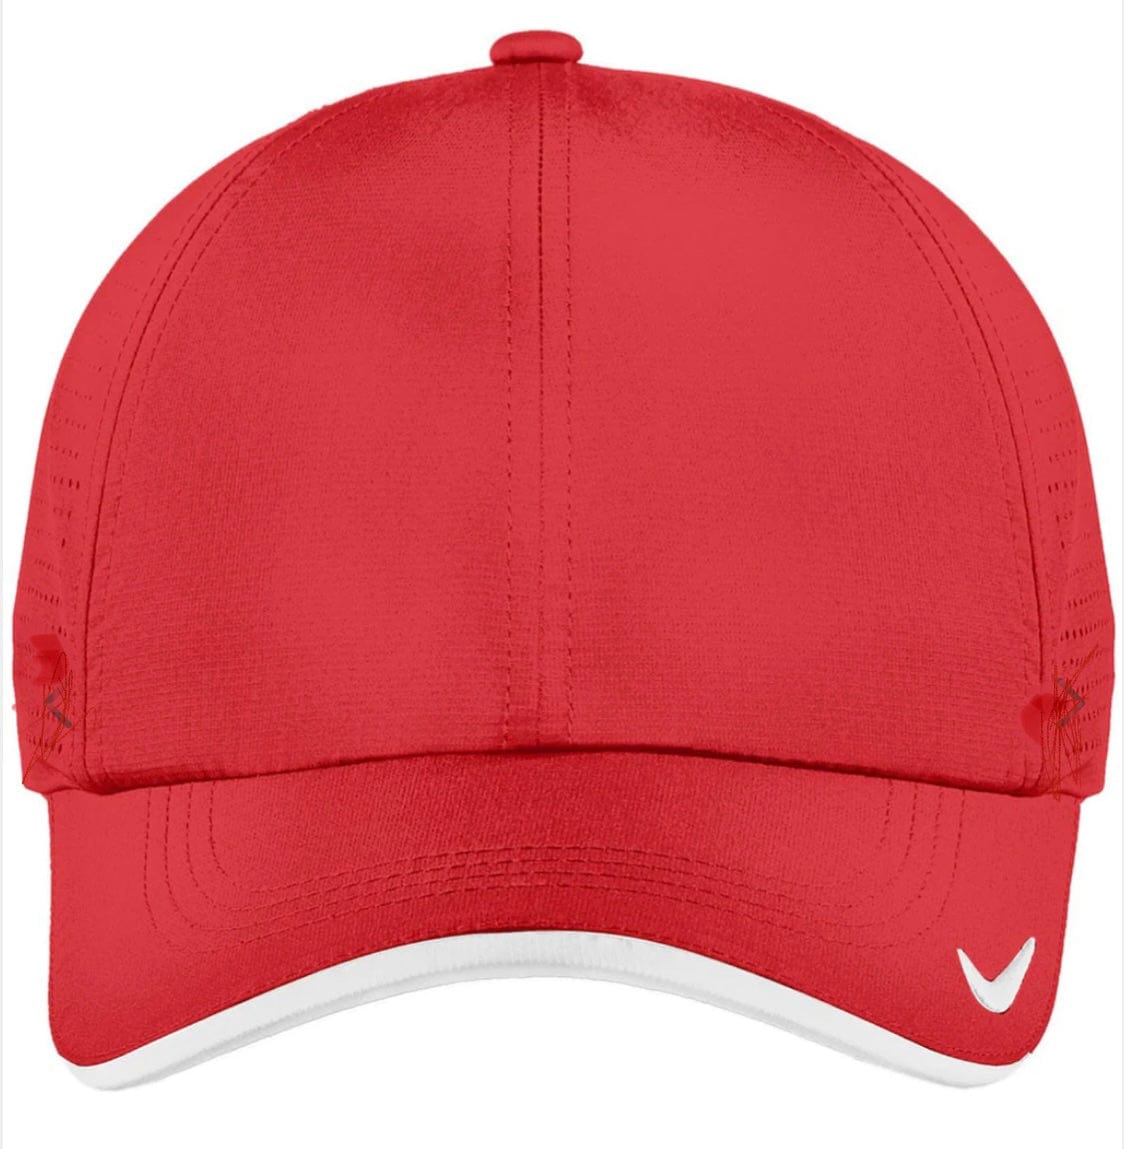 Nike Baseball Caps NikenDry Fit Ball Cap- Custom equestrian team apparel online tack store mobile tack store custom farm apparel custom show stable clothing equestrian lifestyle horse show clothing riding clothes horses equestrian tack store